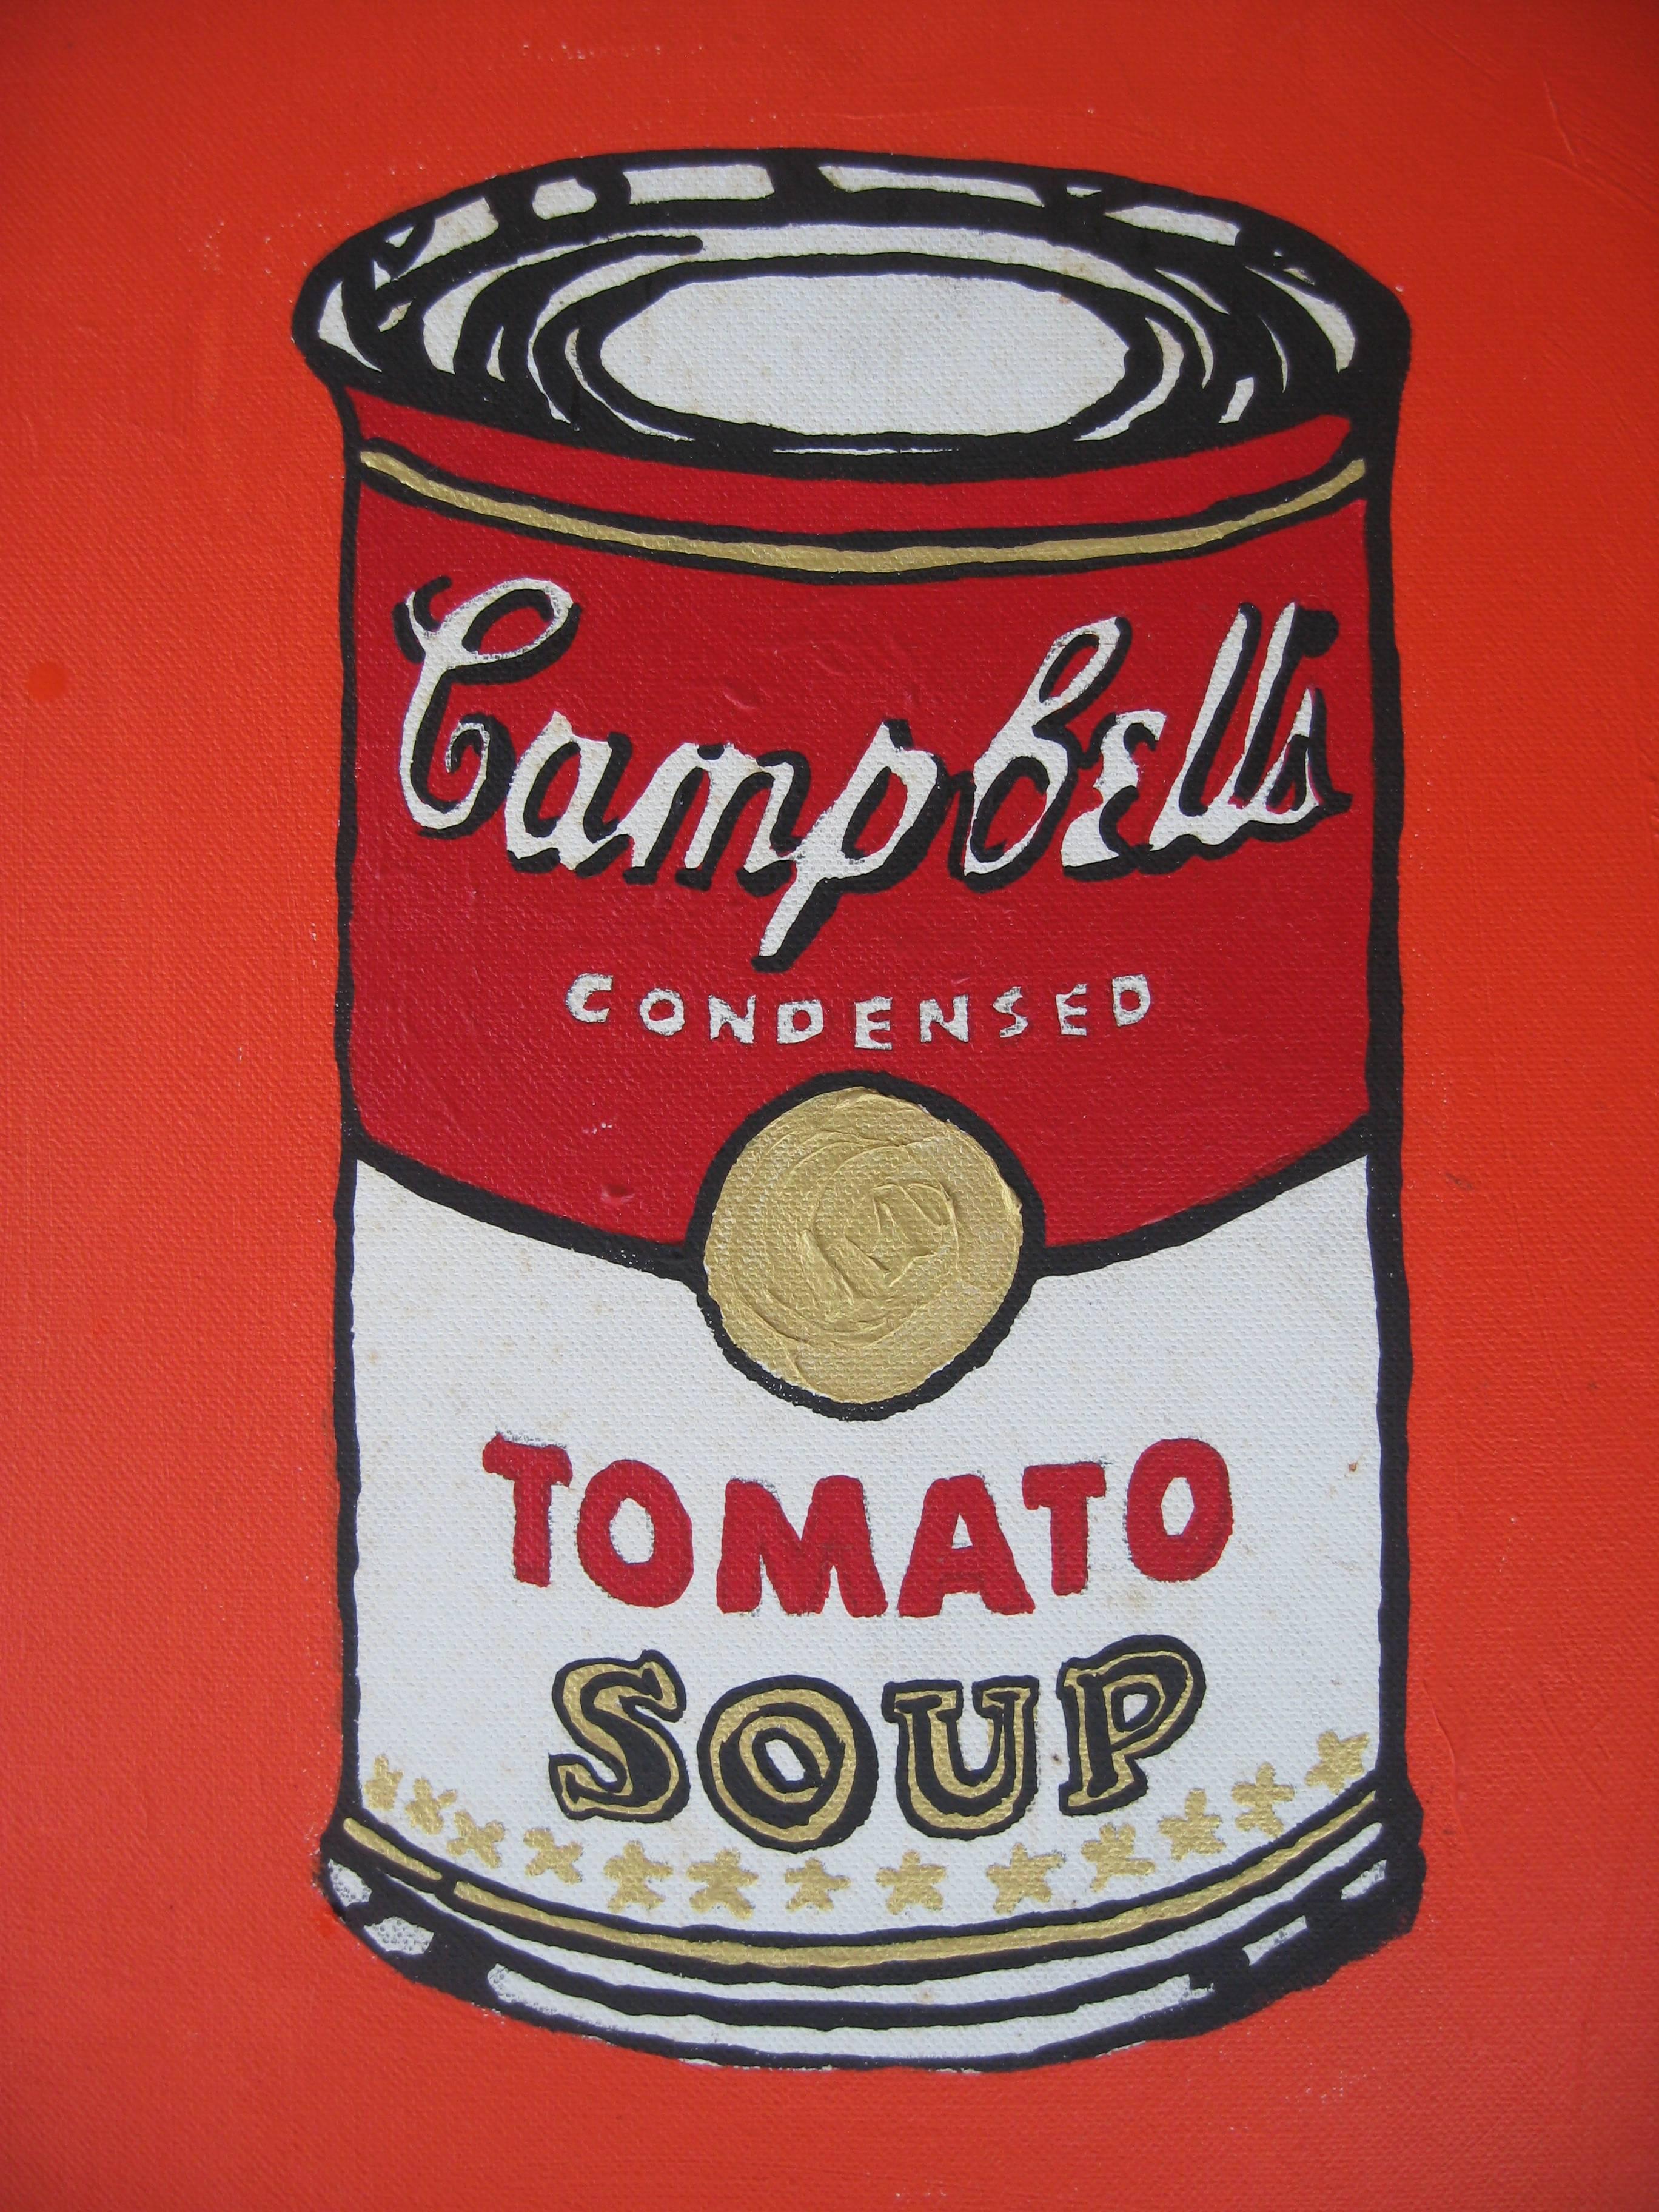 Homage to Andy Warhol's Campbell's Tomato Soup can painting by Ed Higgins. Acrylic paint on stretched canvas. 12